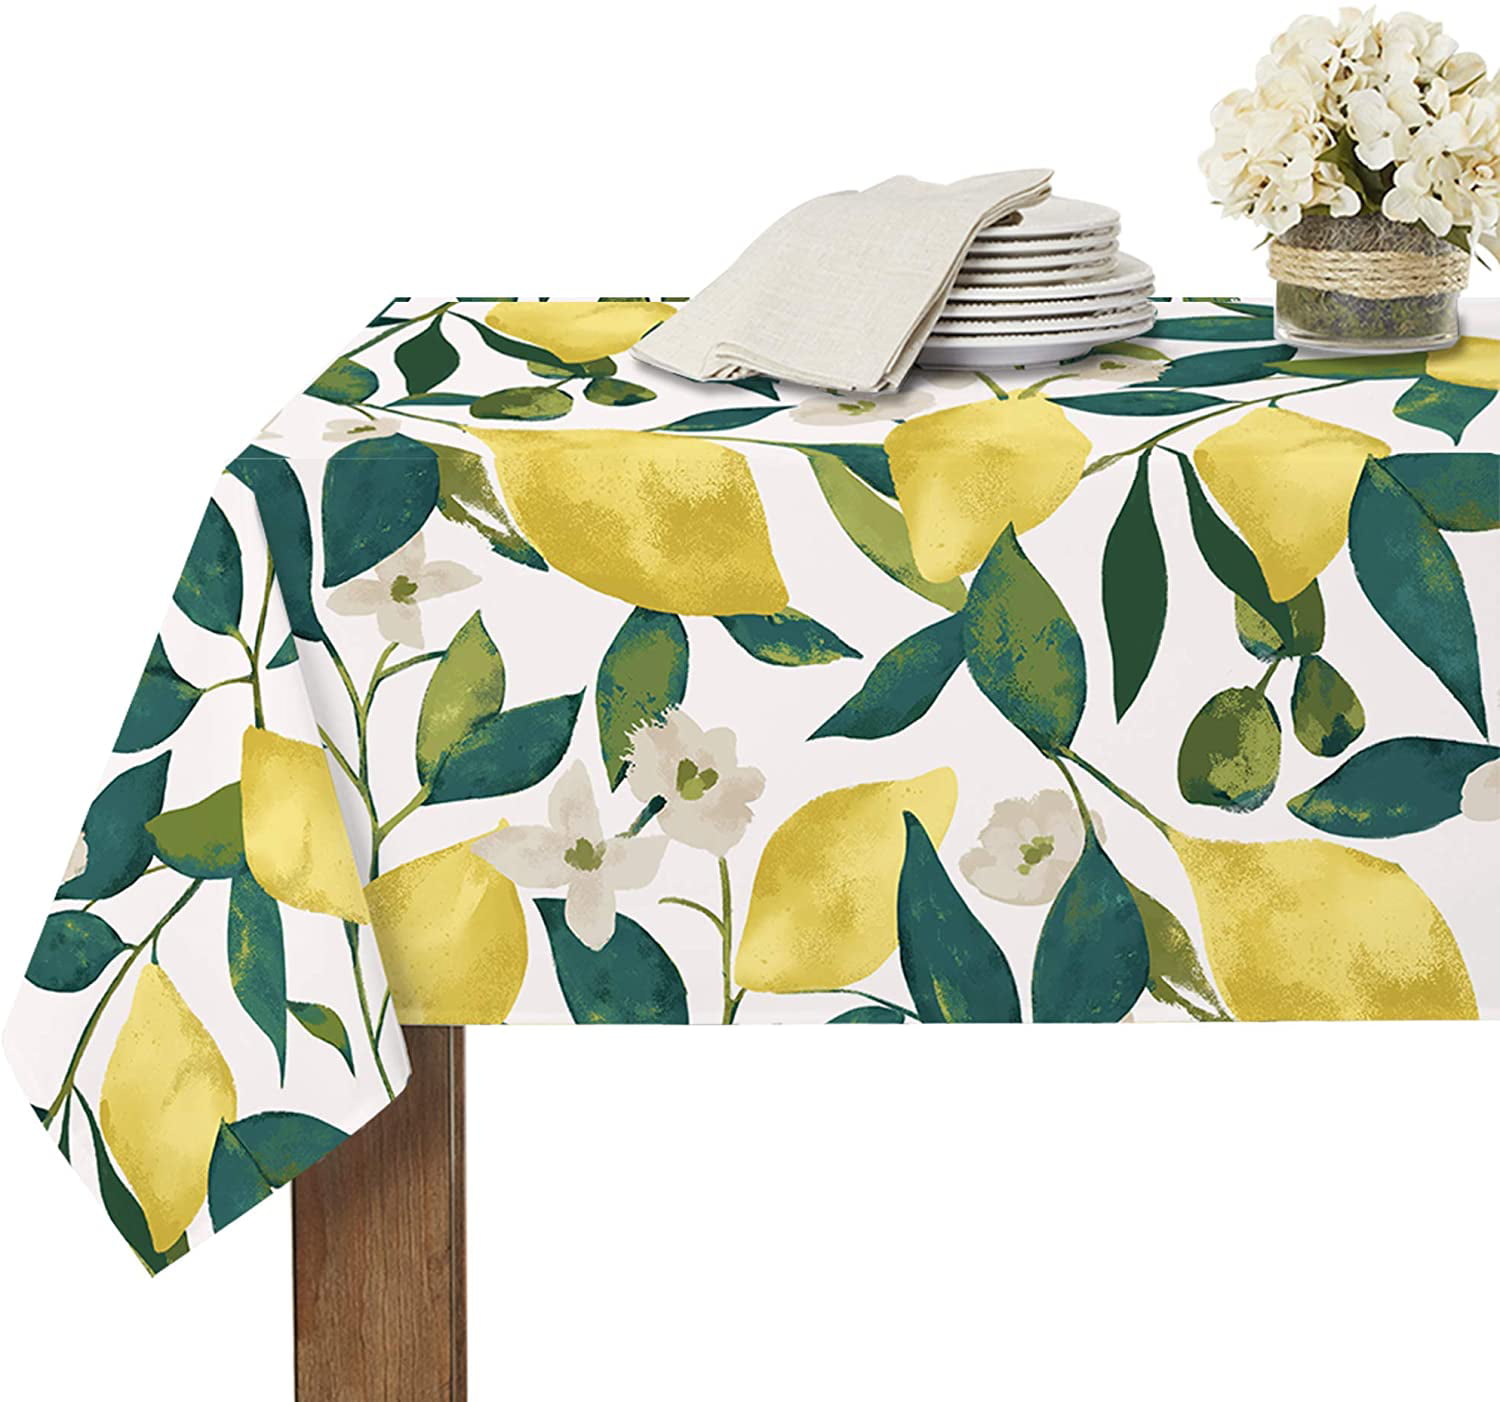 Waterproof Lemon Printed Tablecloth Table Cloth Cover Kitchen Dining Home Decor